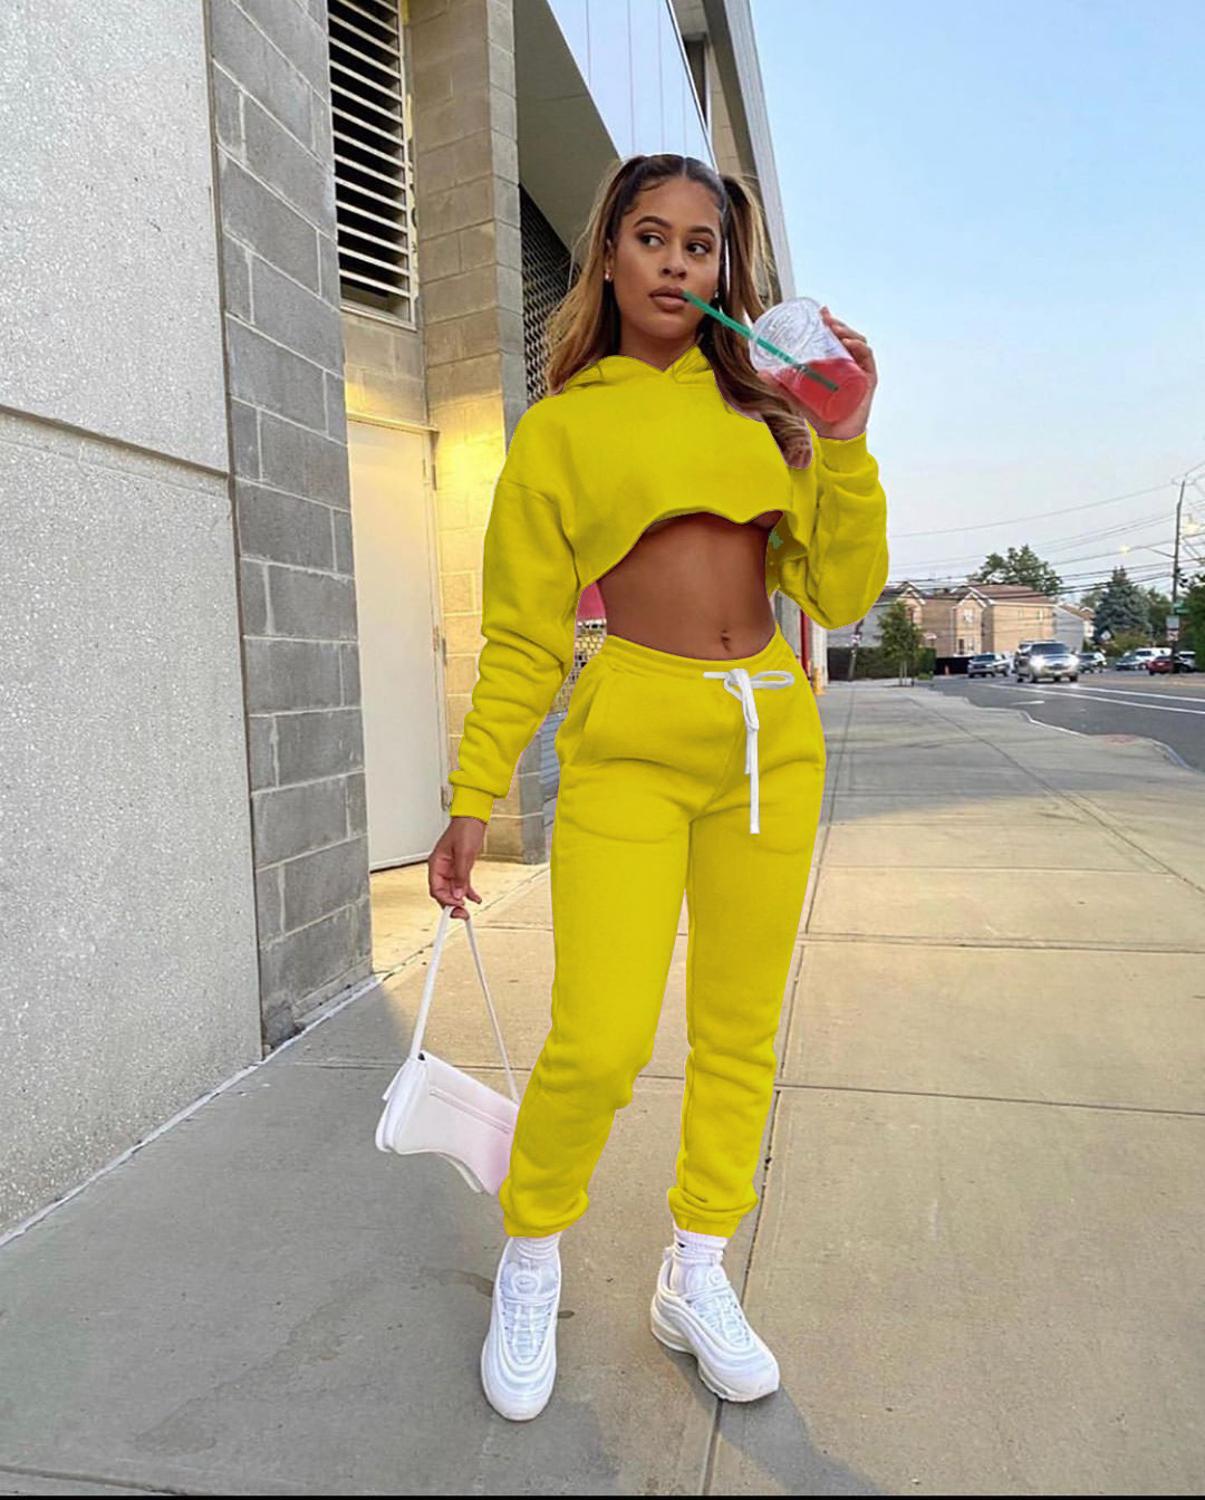 Chicmy Baby Girl Letter Print Sweatsuit Women's Set Hooded Crop Top Jogger Pants Set Tracksuit Fitness Two Piece Set Outfits